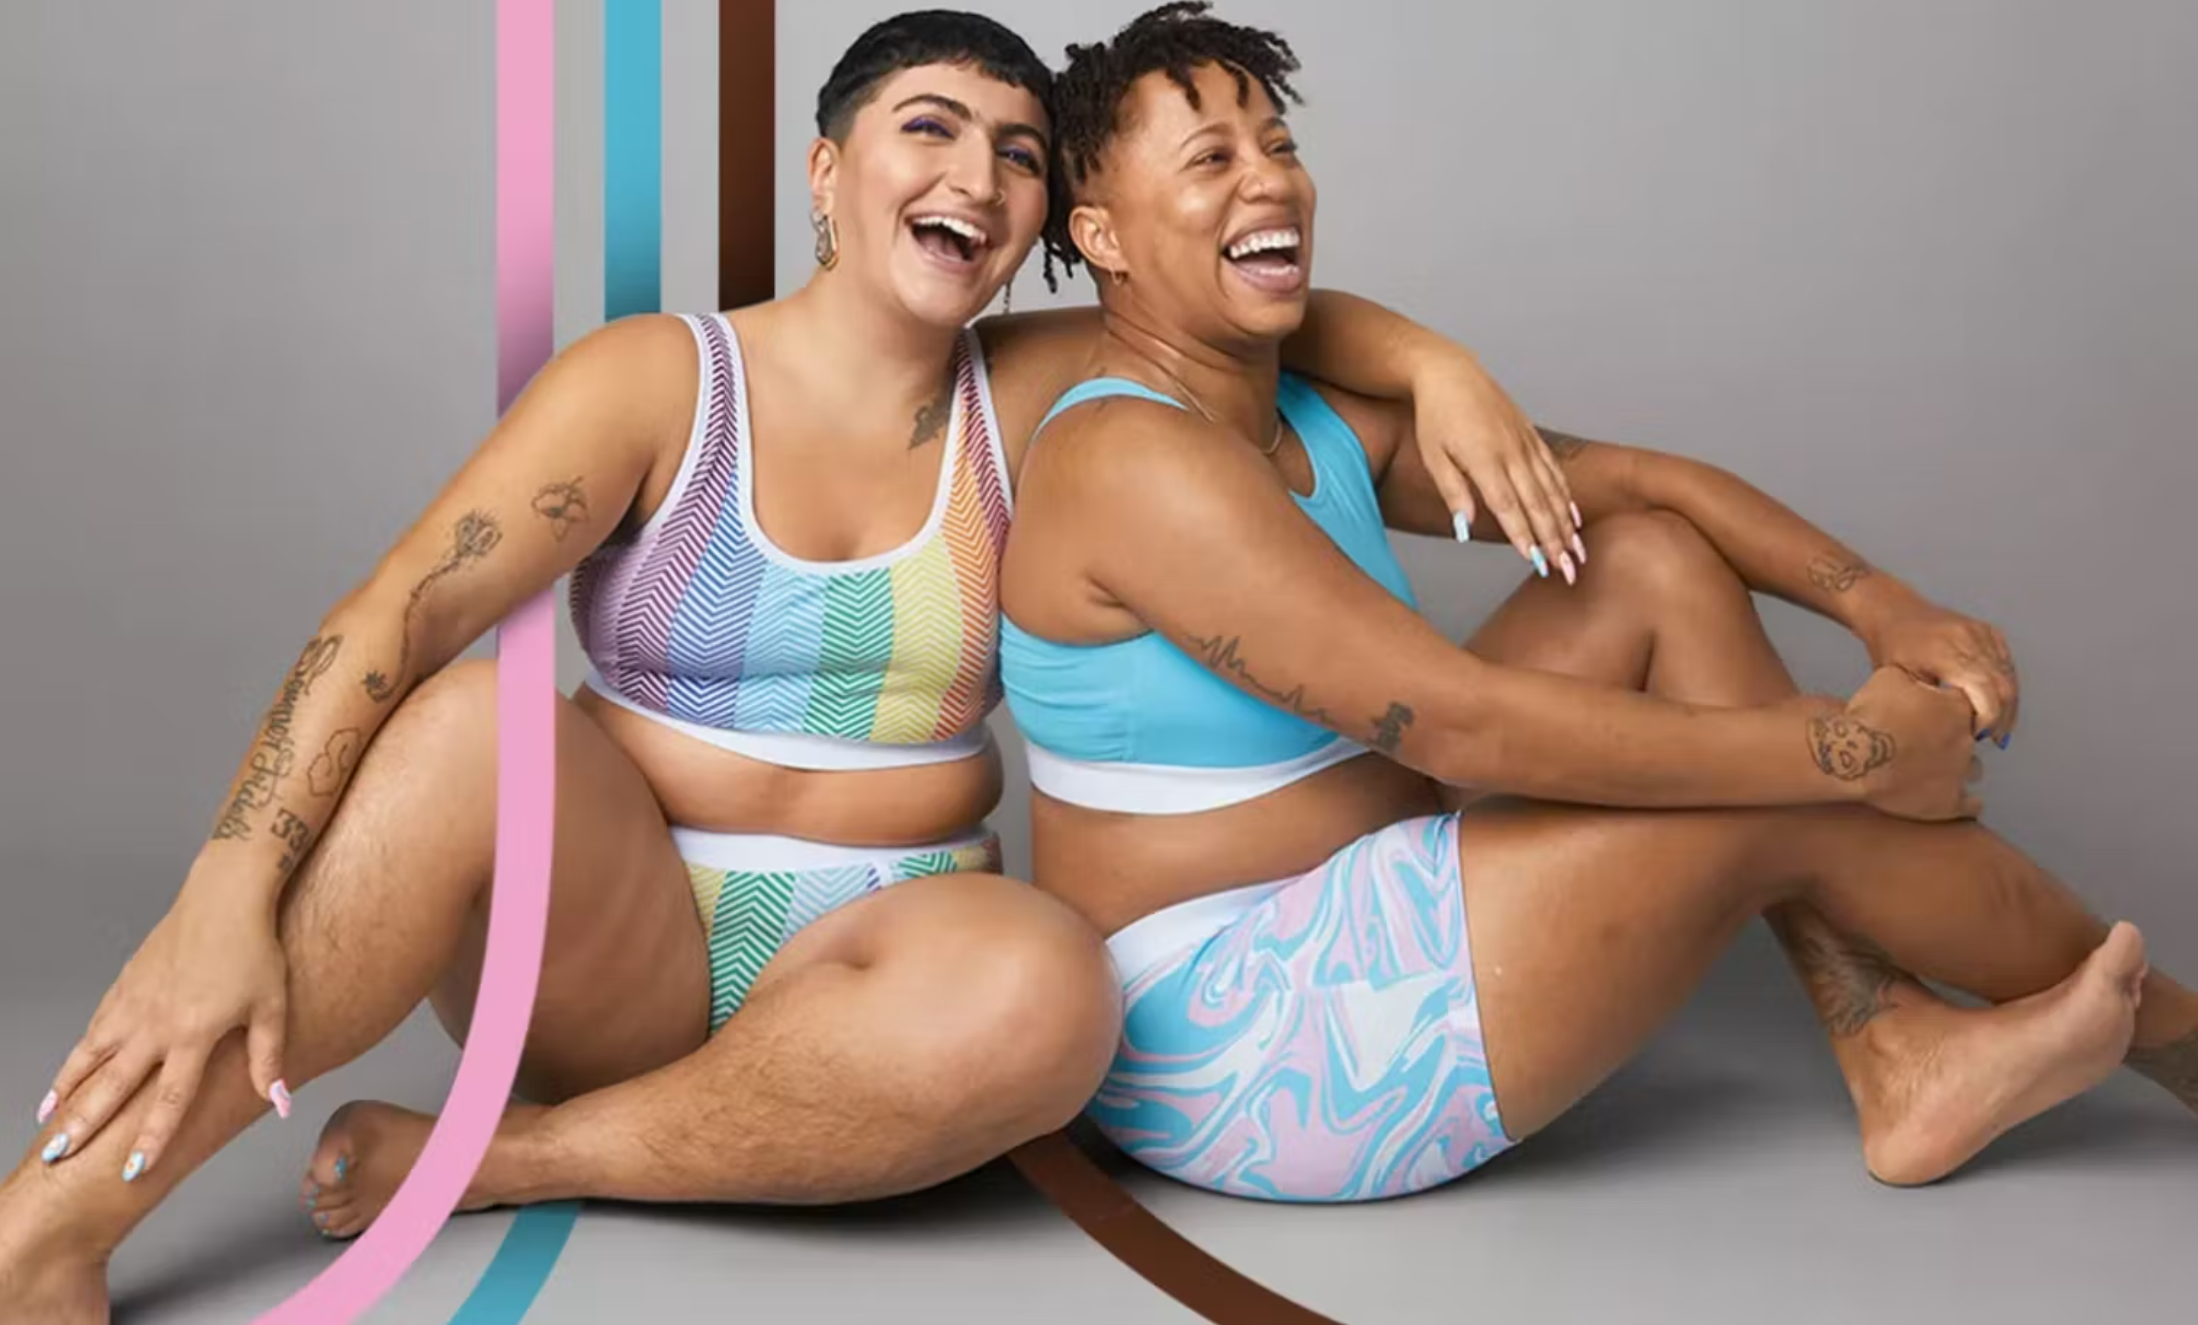 Target Launches Collaboration with Two Queer-Owned, Female-Founded